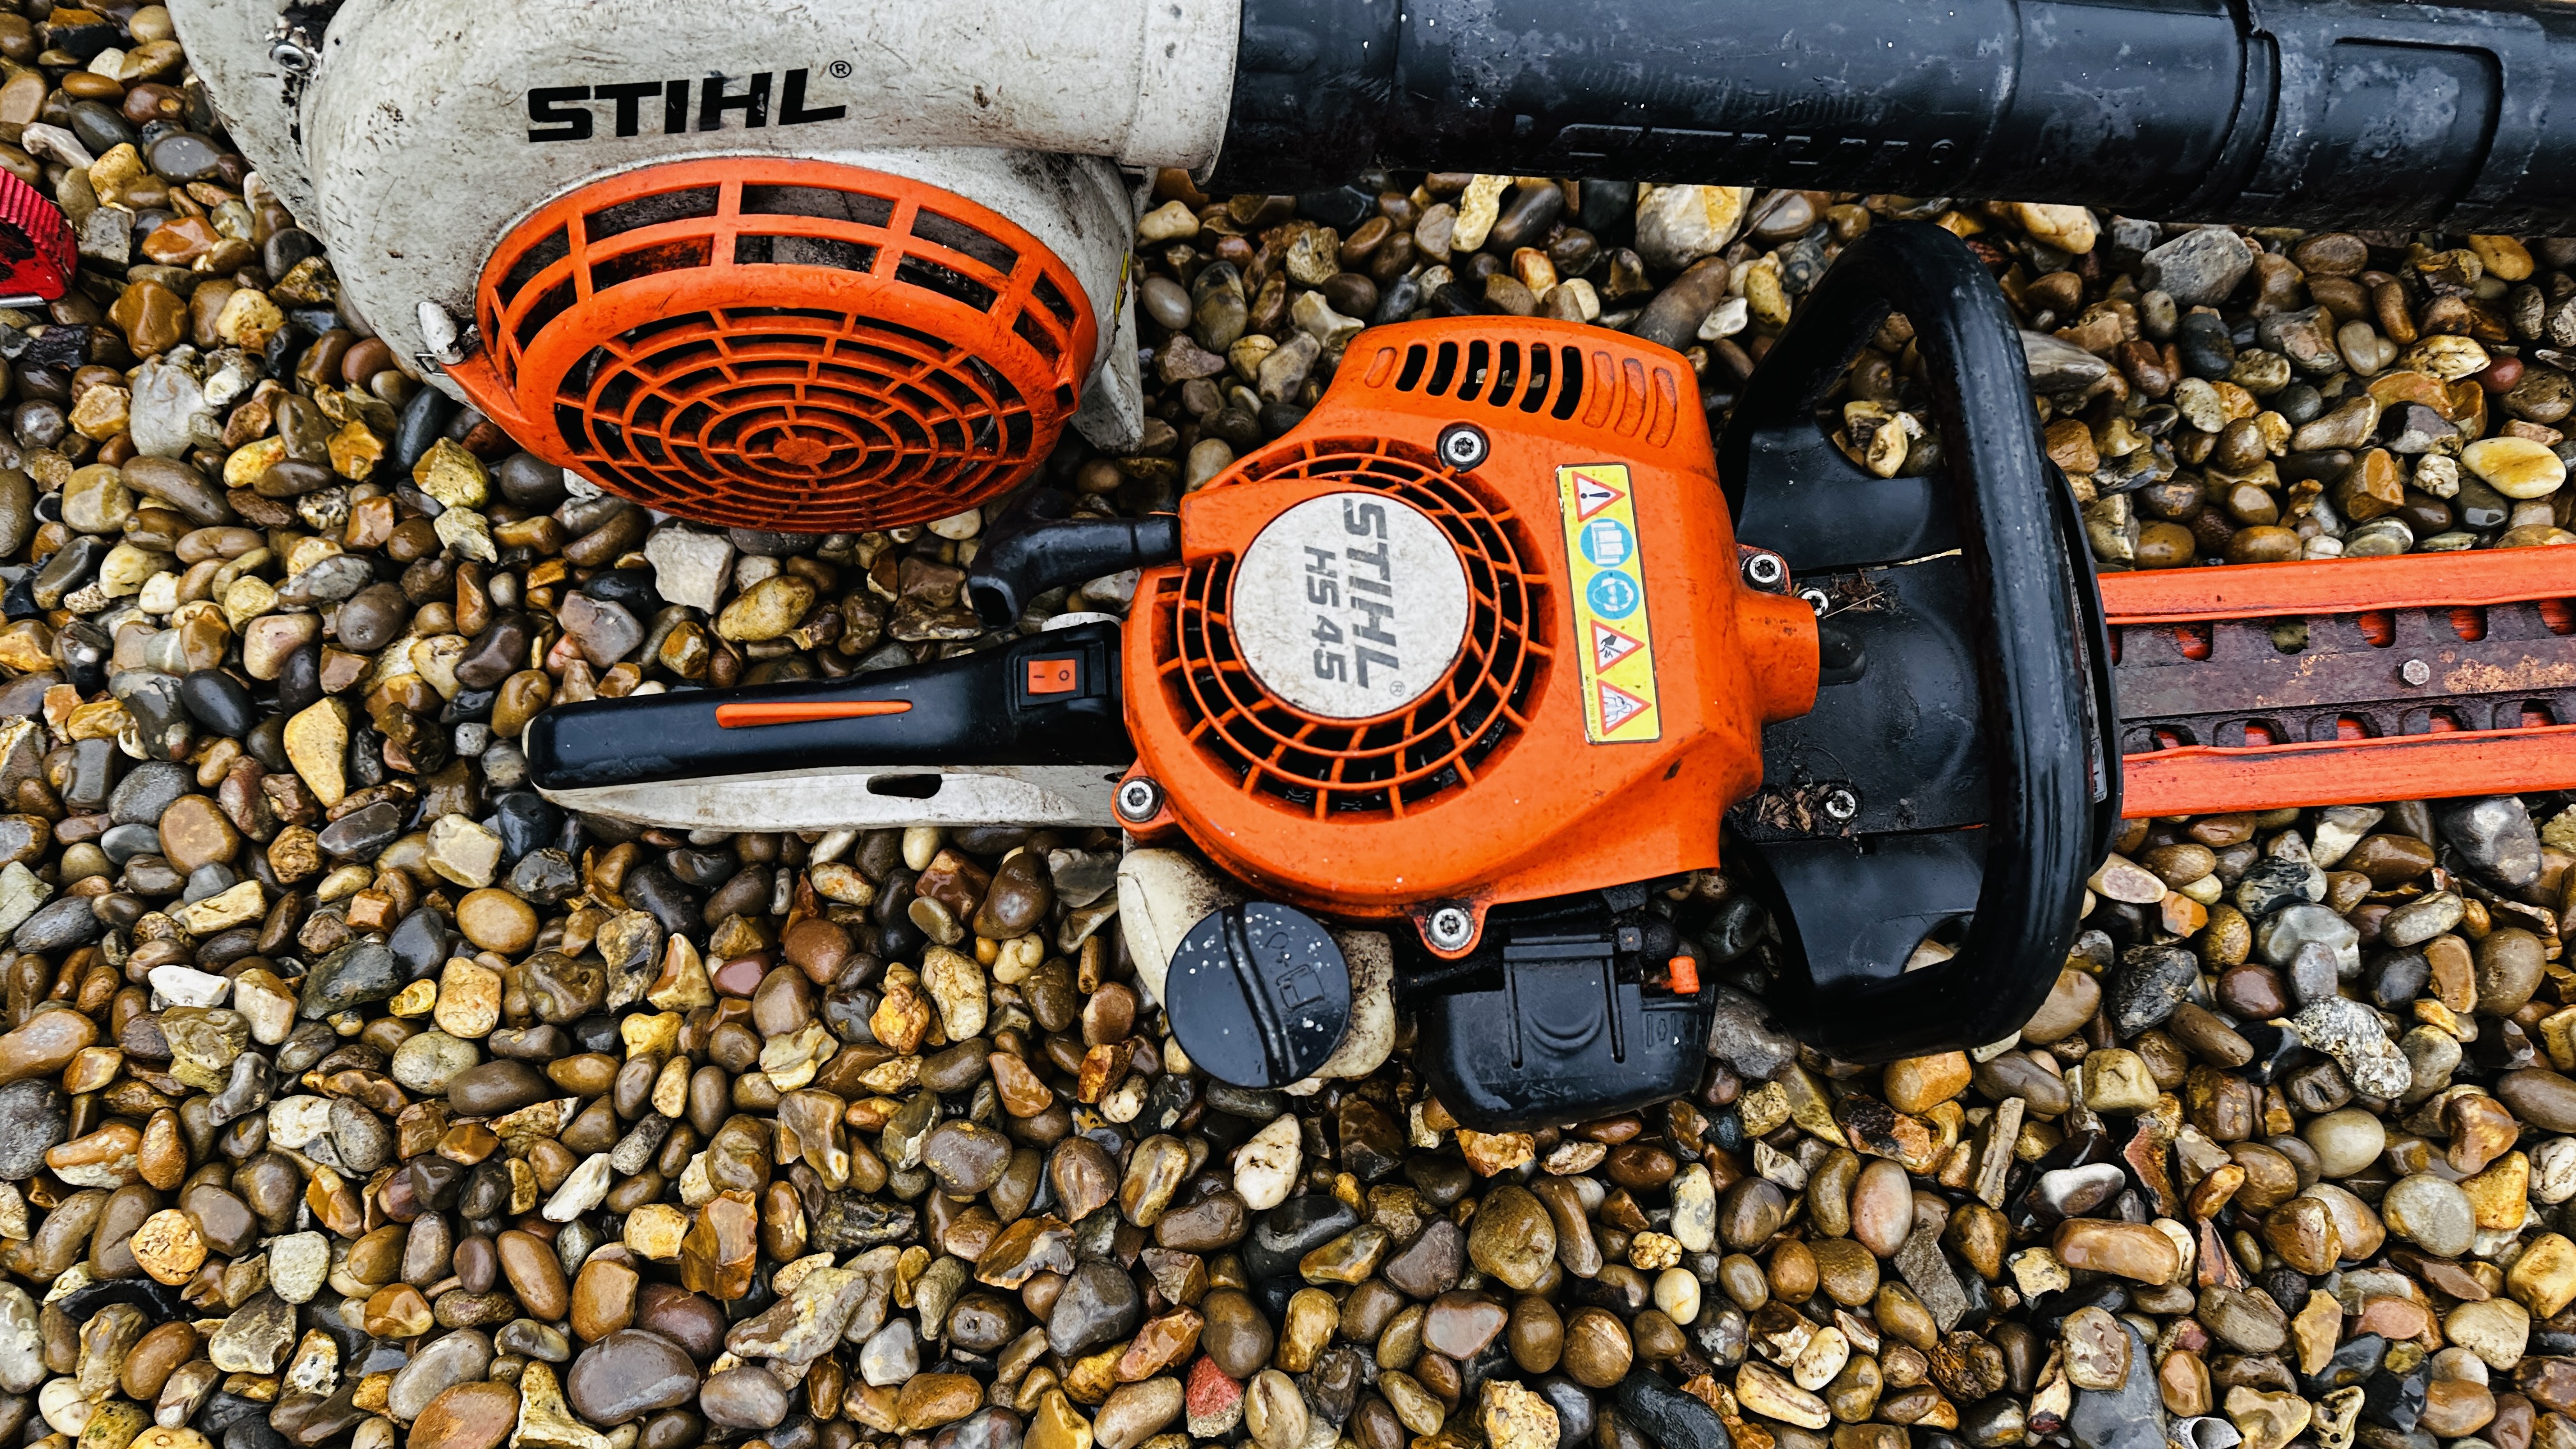 STIHL PETROL DRIVEN GARDEN BLOWER AND STIHL HS45 PETROL DRIVEN HEDGE TRIMMER - AS CLEARED, - Image 2 of 8